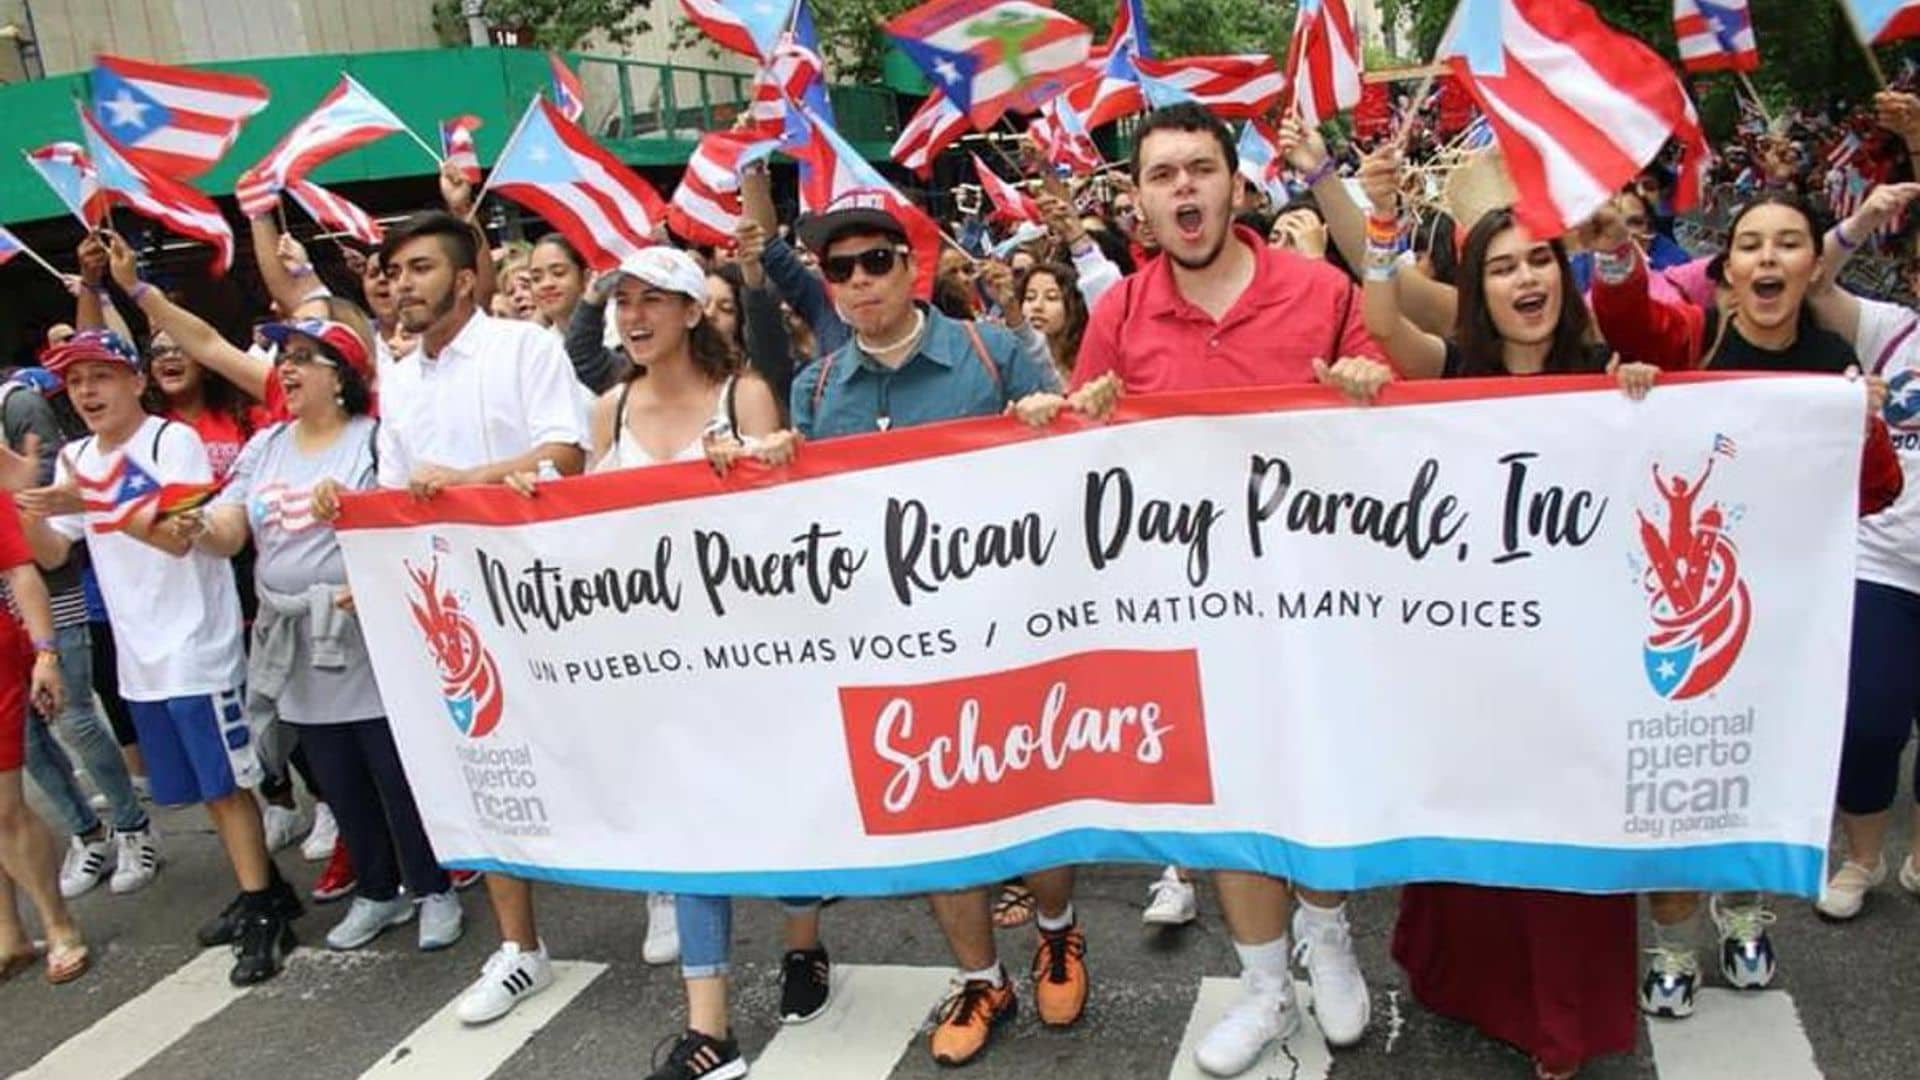 The National Puerto Rican Day Parade